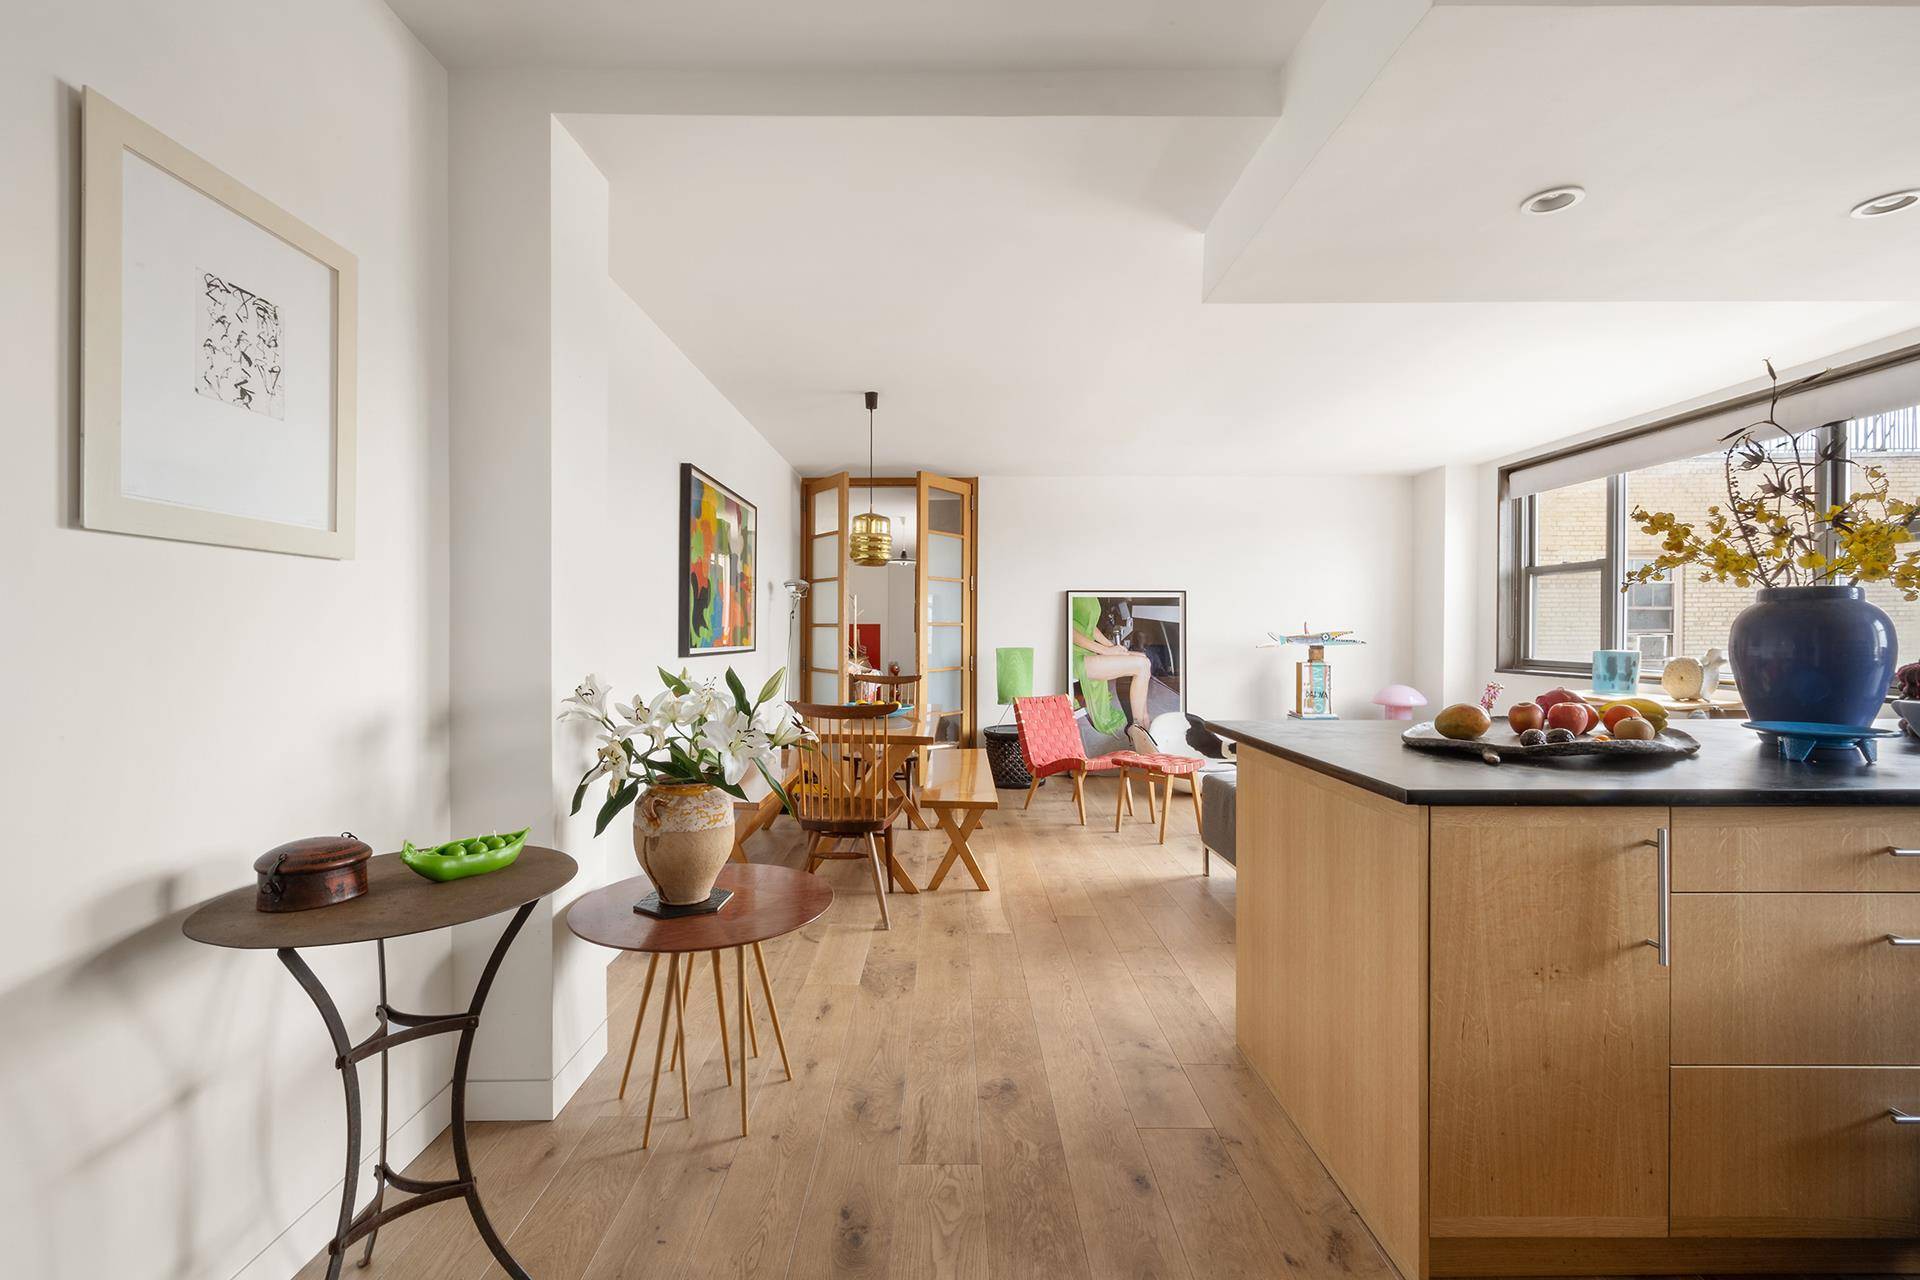 With sweeping South views over the West Village, unimpeded all the way to the Freedom Tower, Apartment 17NP at 2 Horatio Street is blessed with beautiful light all day long, ...